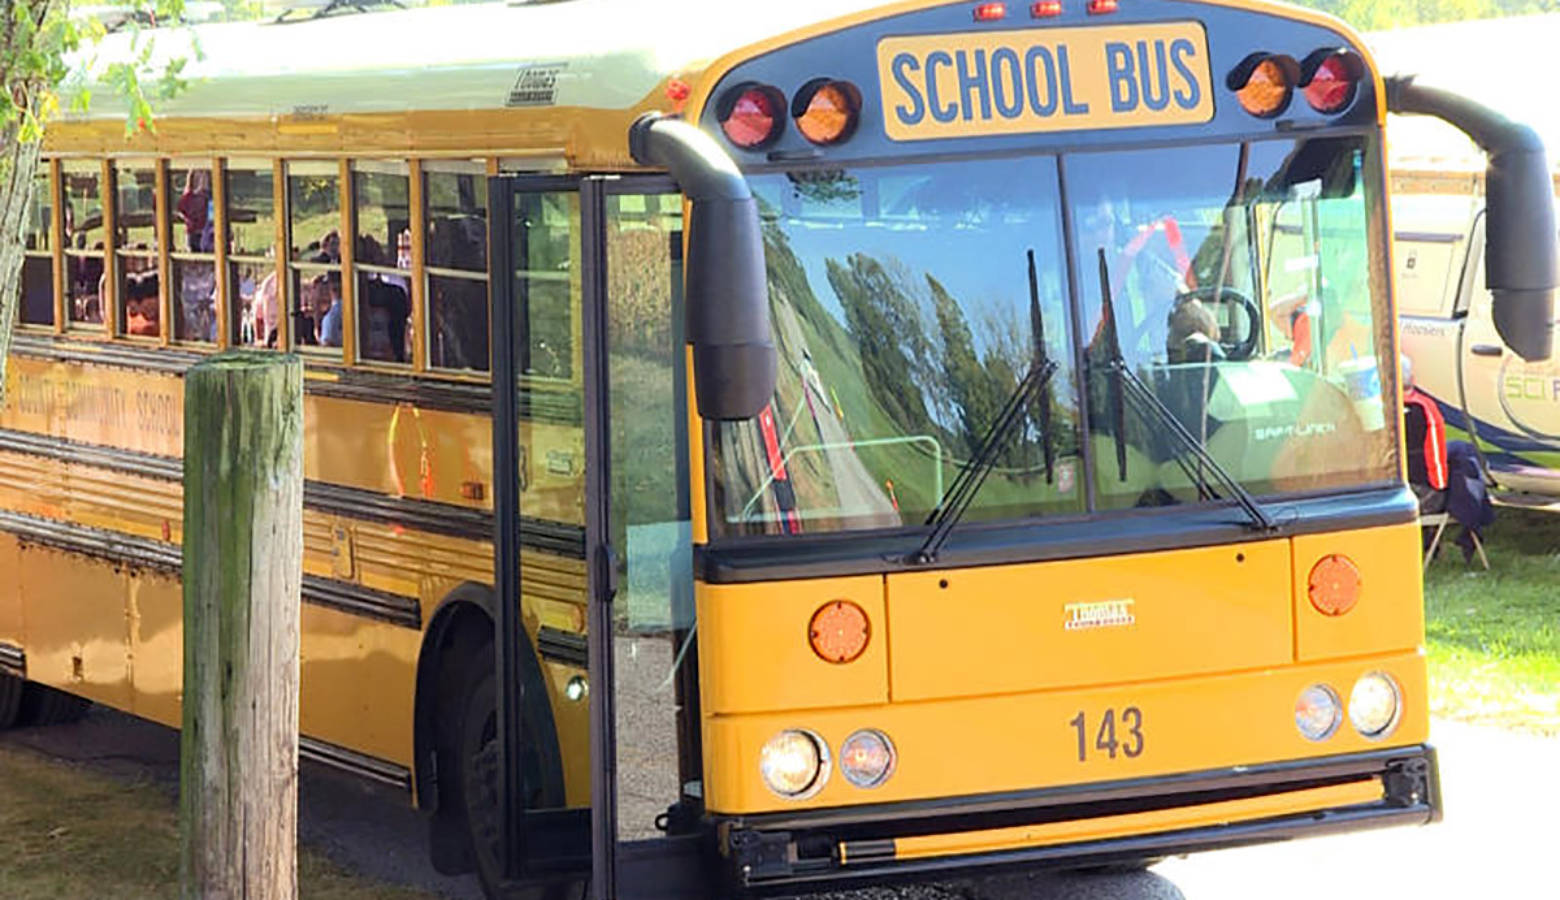 A law that went into effect earlier this year makes says drivers caught illegally passing stopped school buses can face penalties including fines of up to $5,000 or have their license suspended for up to a year. (Jeanie Lindsay/IPB News)